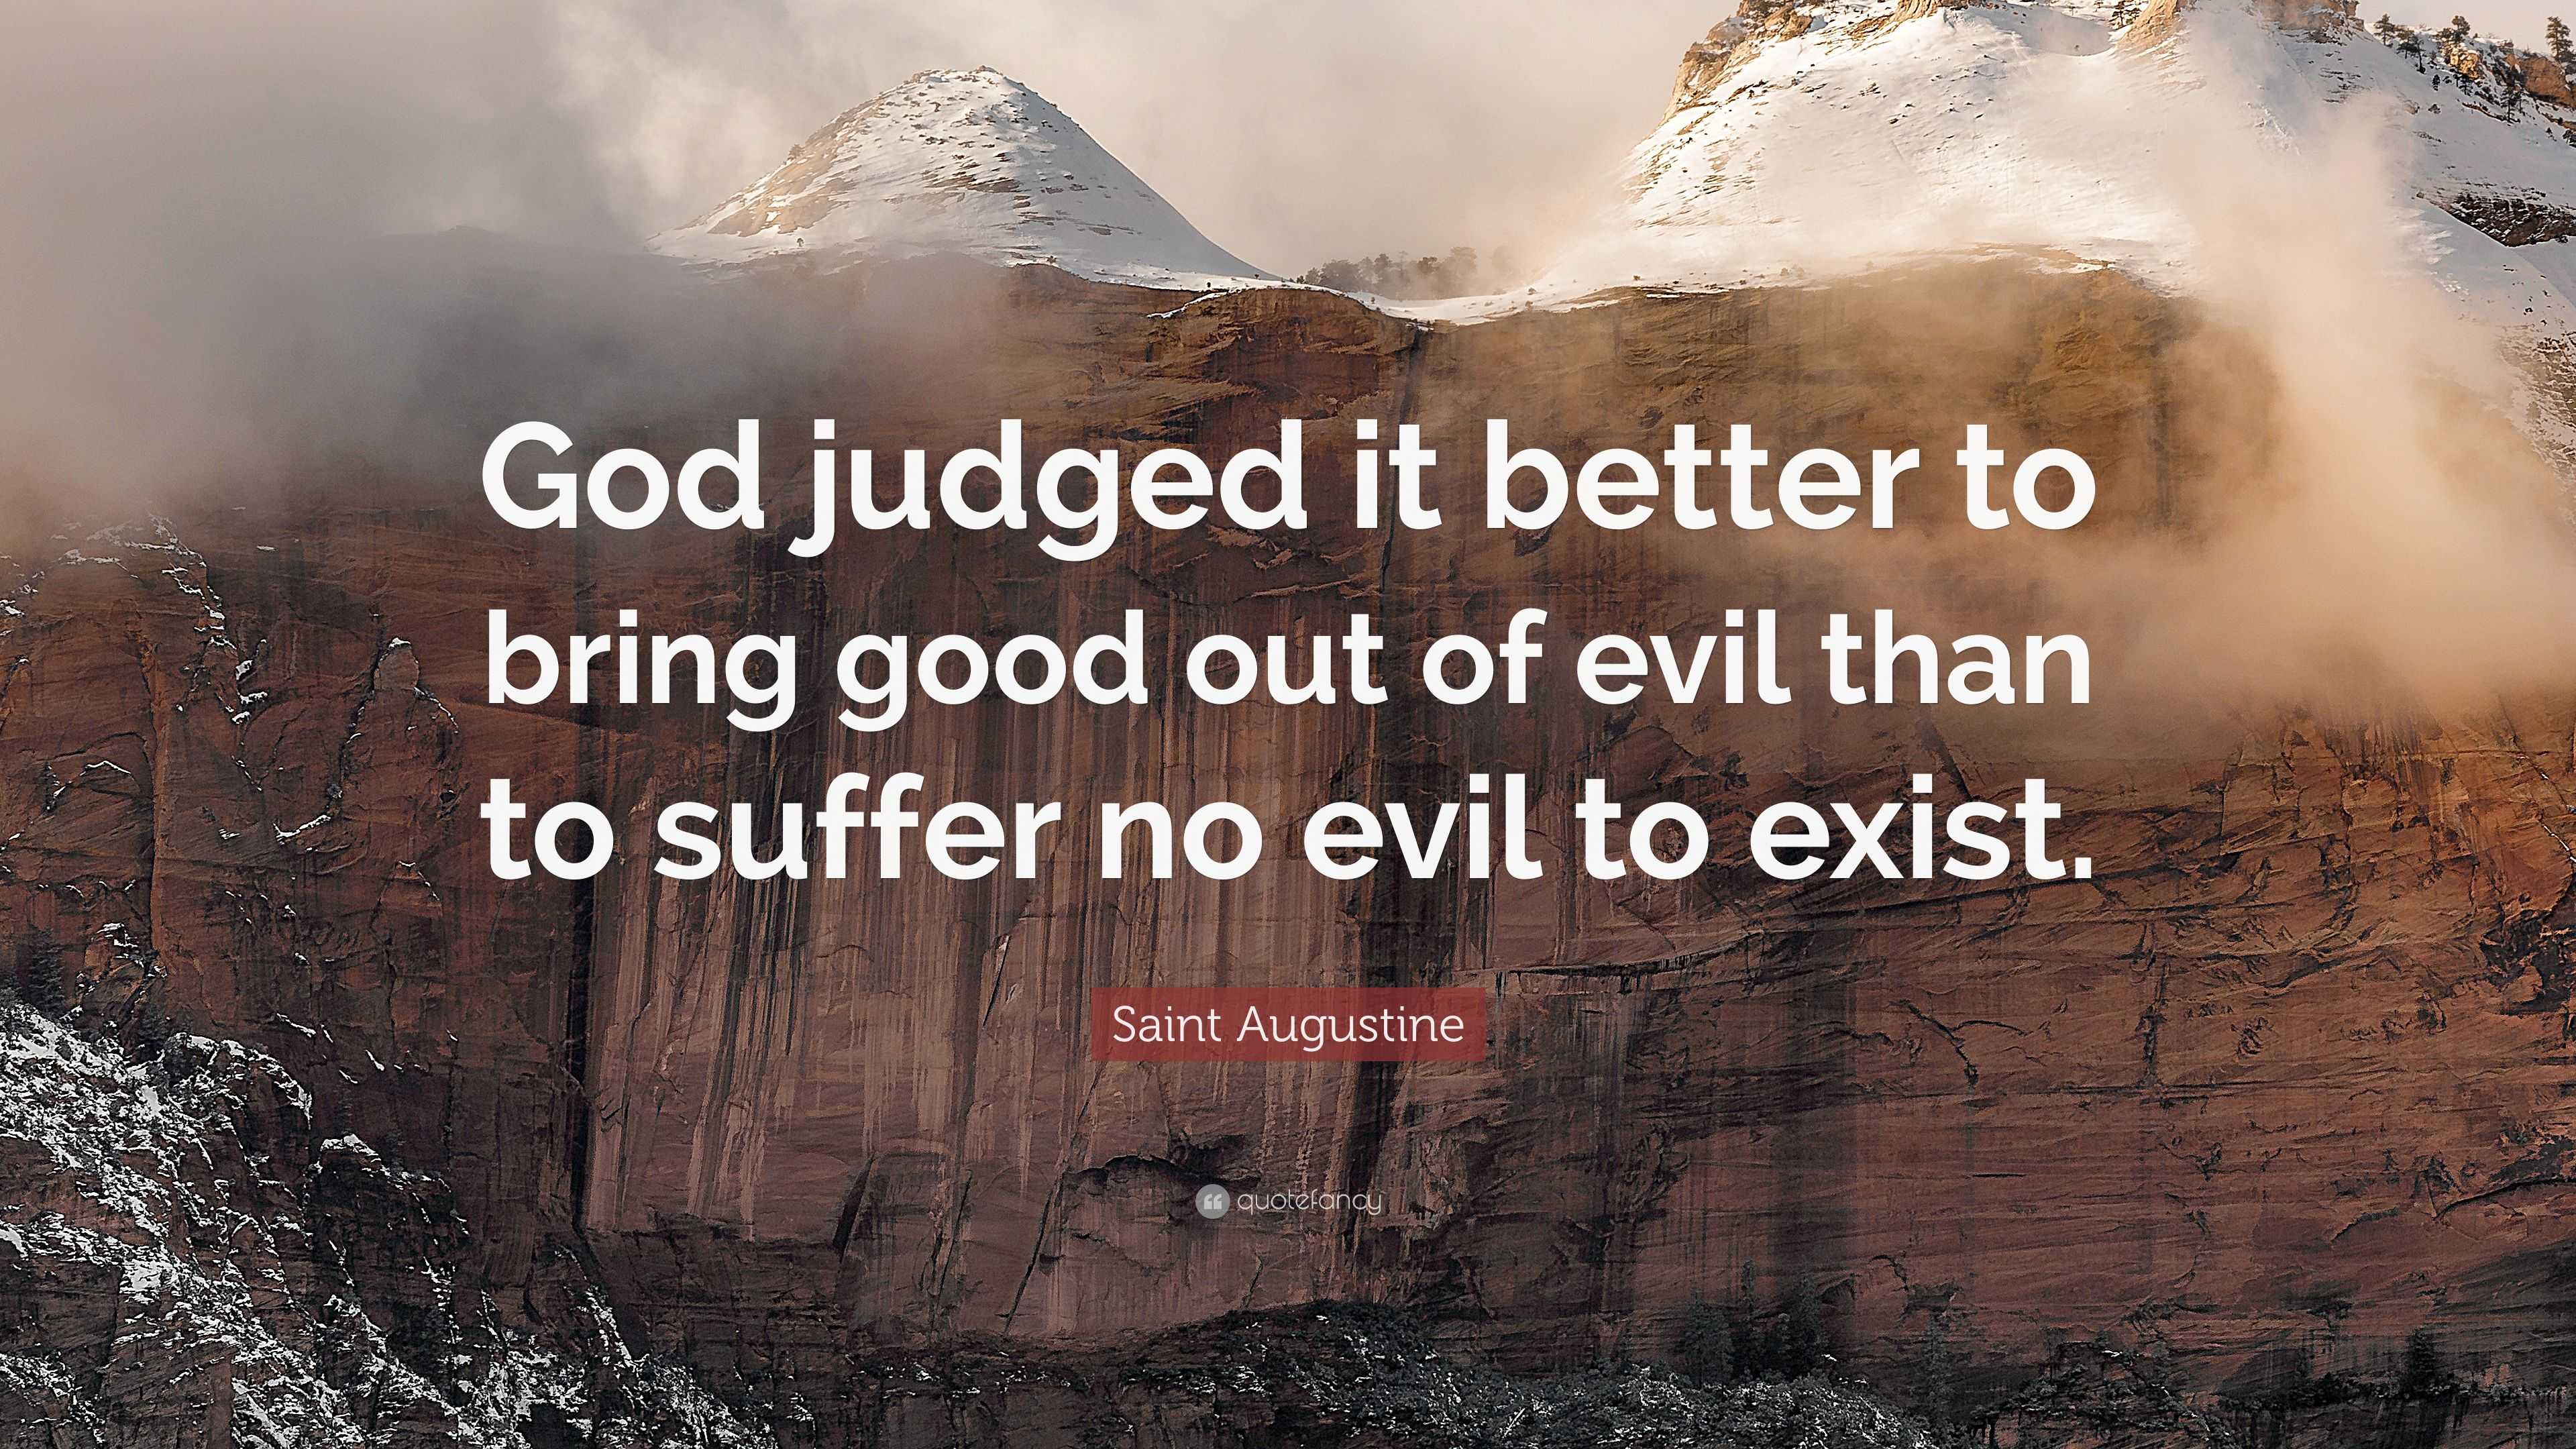 Saint Augustine Quote: “God judged it better to bring good out of evil ...